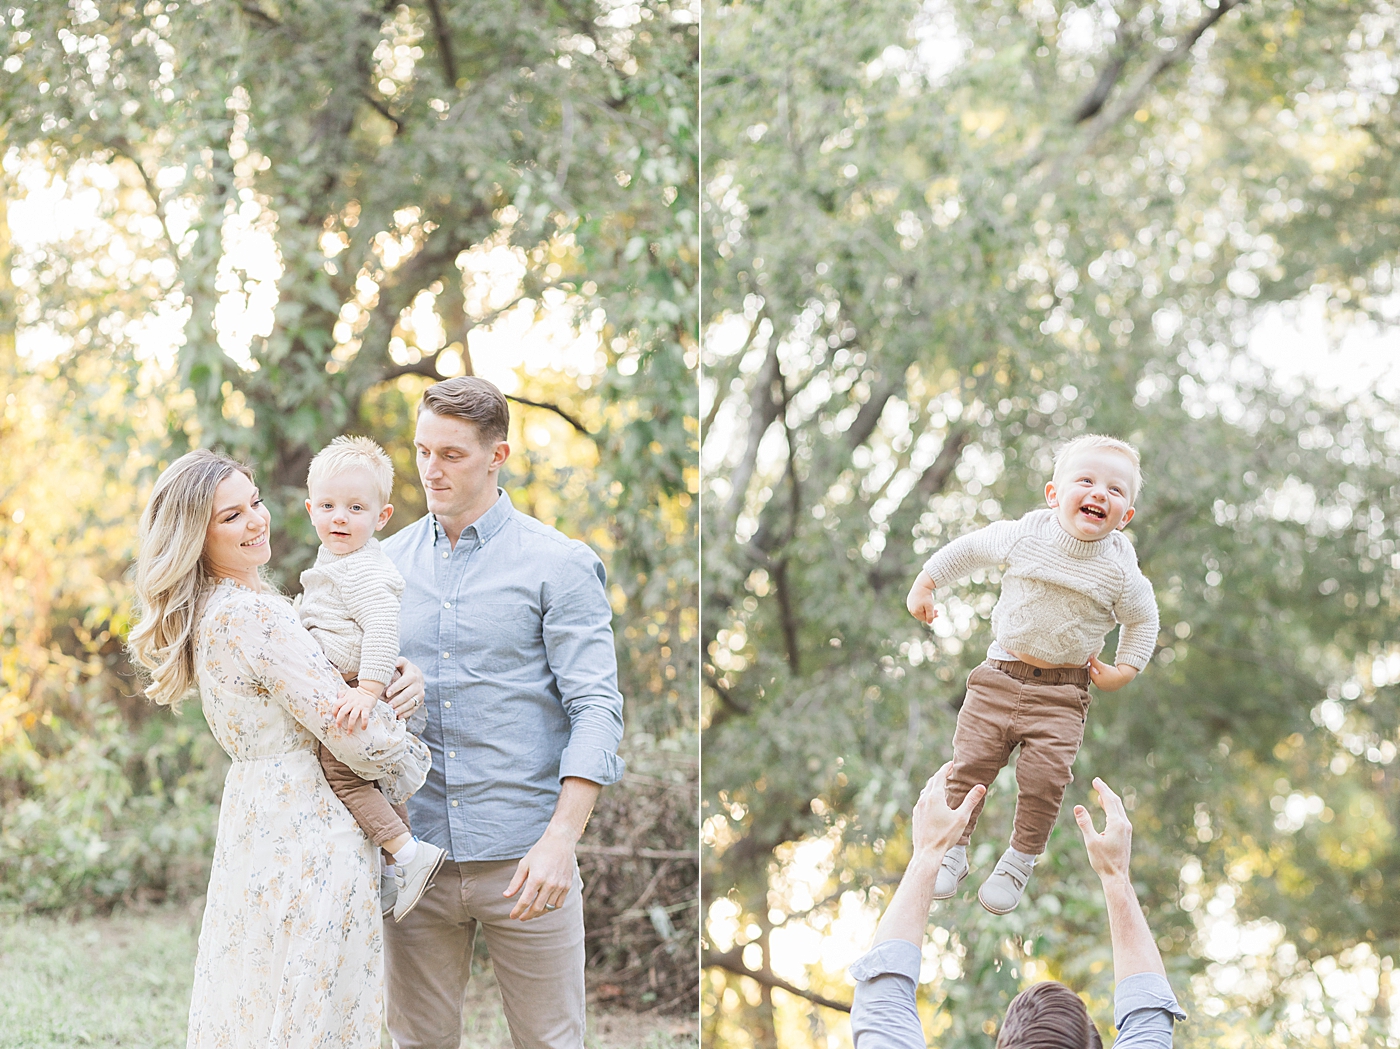 Mom and Dad with youngest son. Dad is throwing him up in the air. Photos by Fresh Light Photography